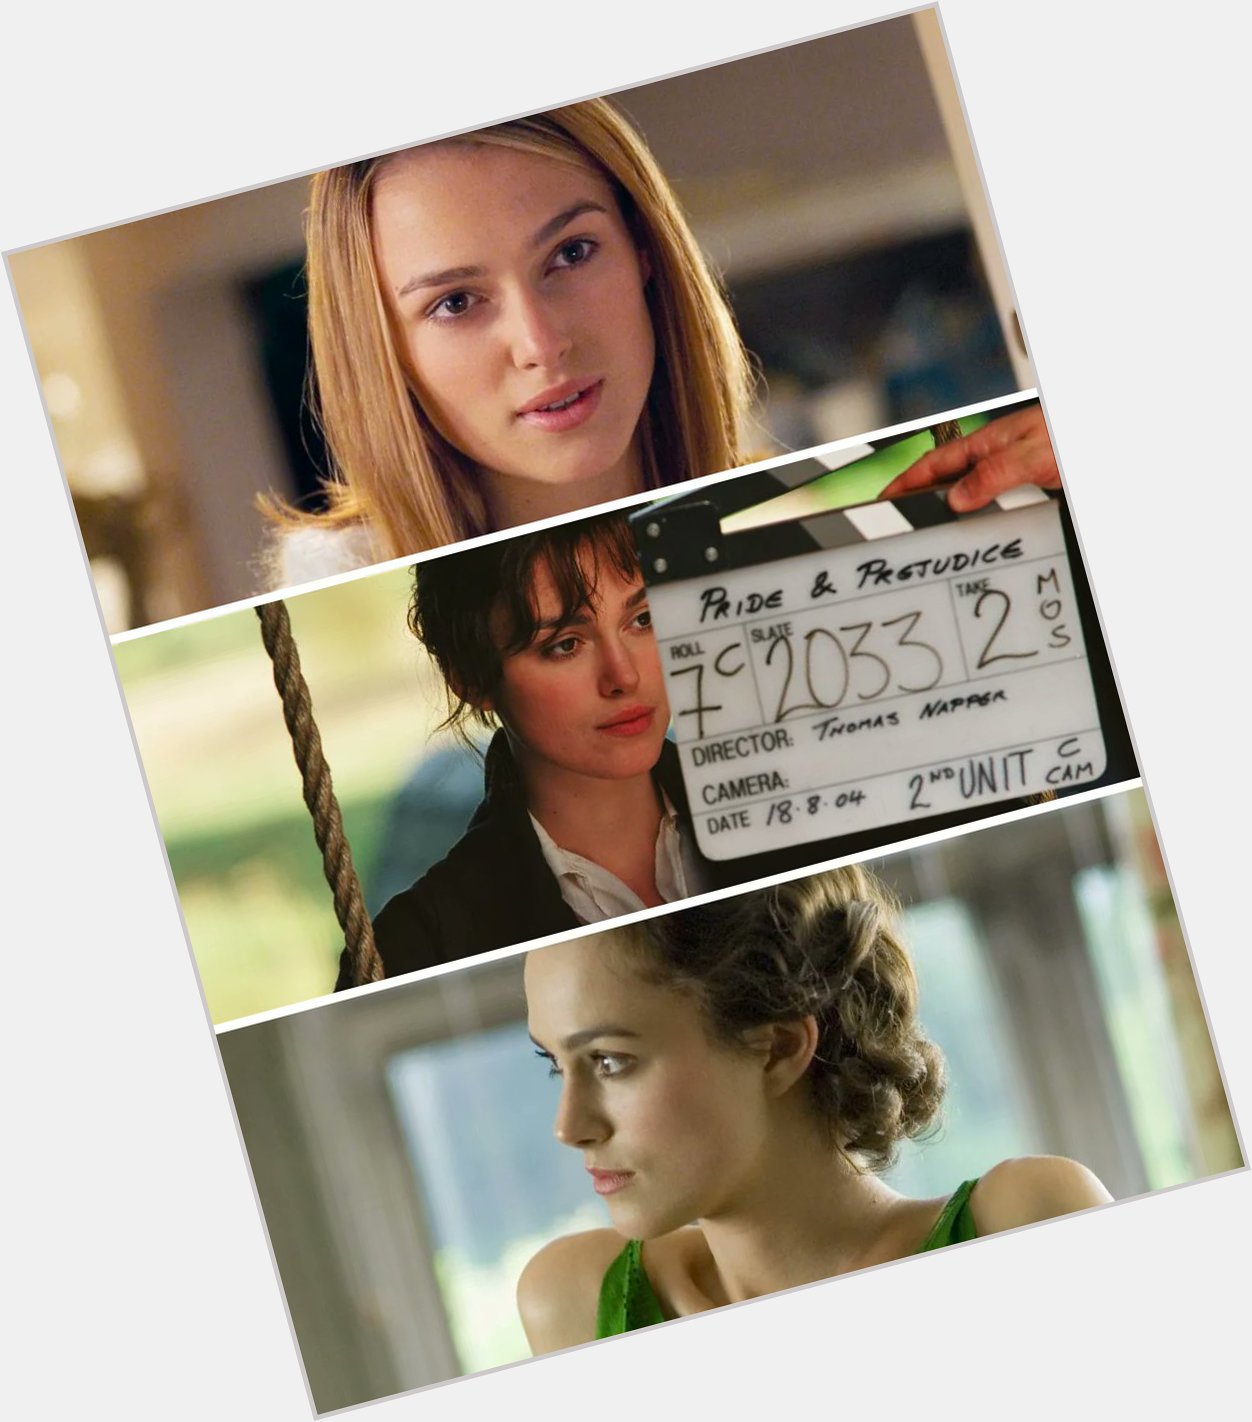 Happy Birthday to star of Love Actually, Pride & Prejudice and Atonement, Keira Knightley  